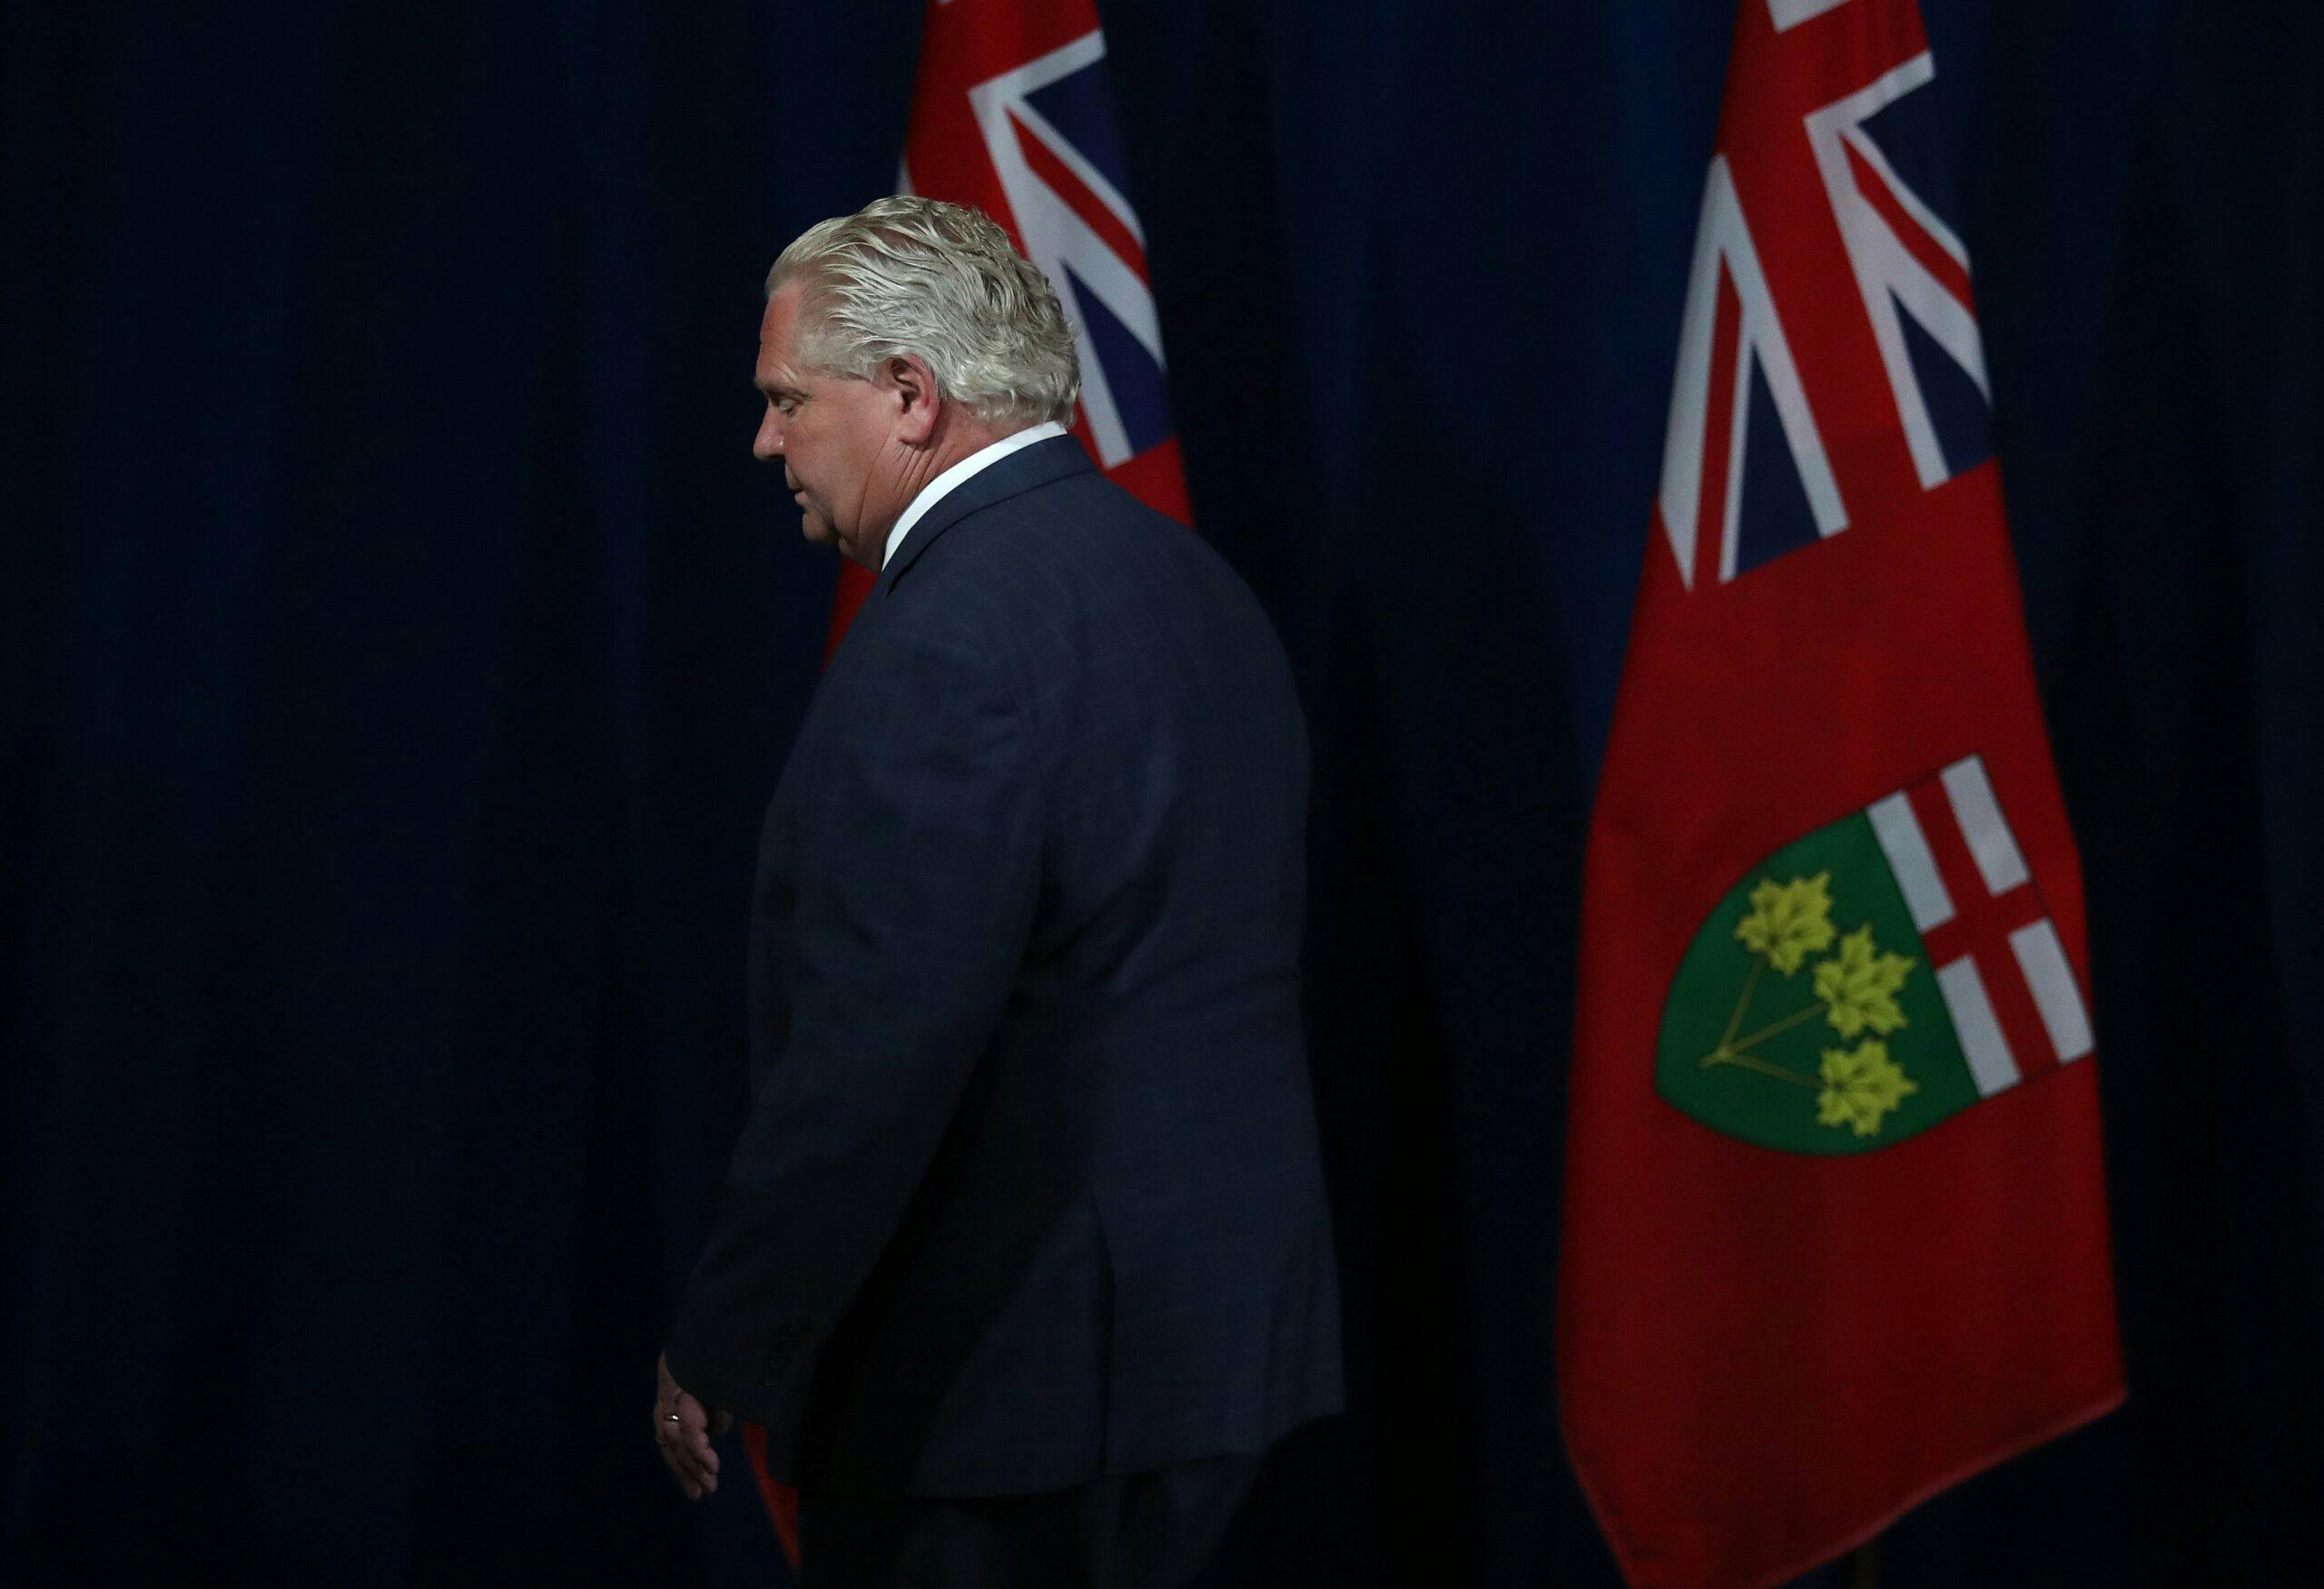 Davidson: The Ford government is ideologically lost, and needs a map